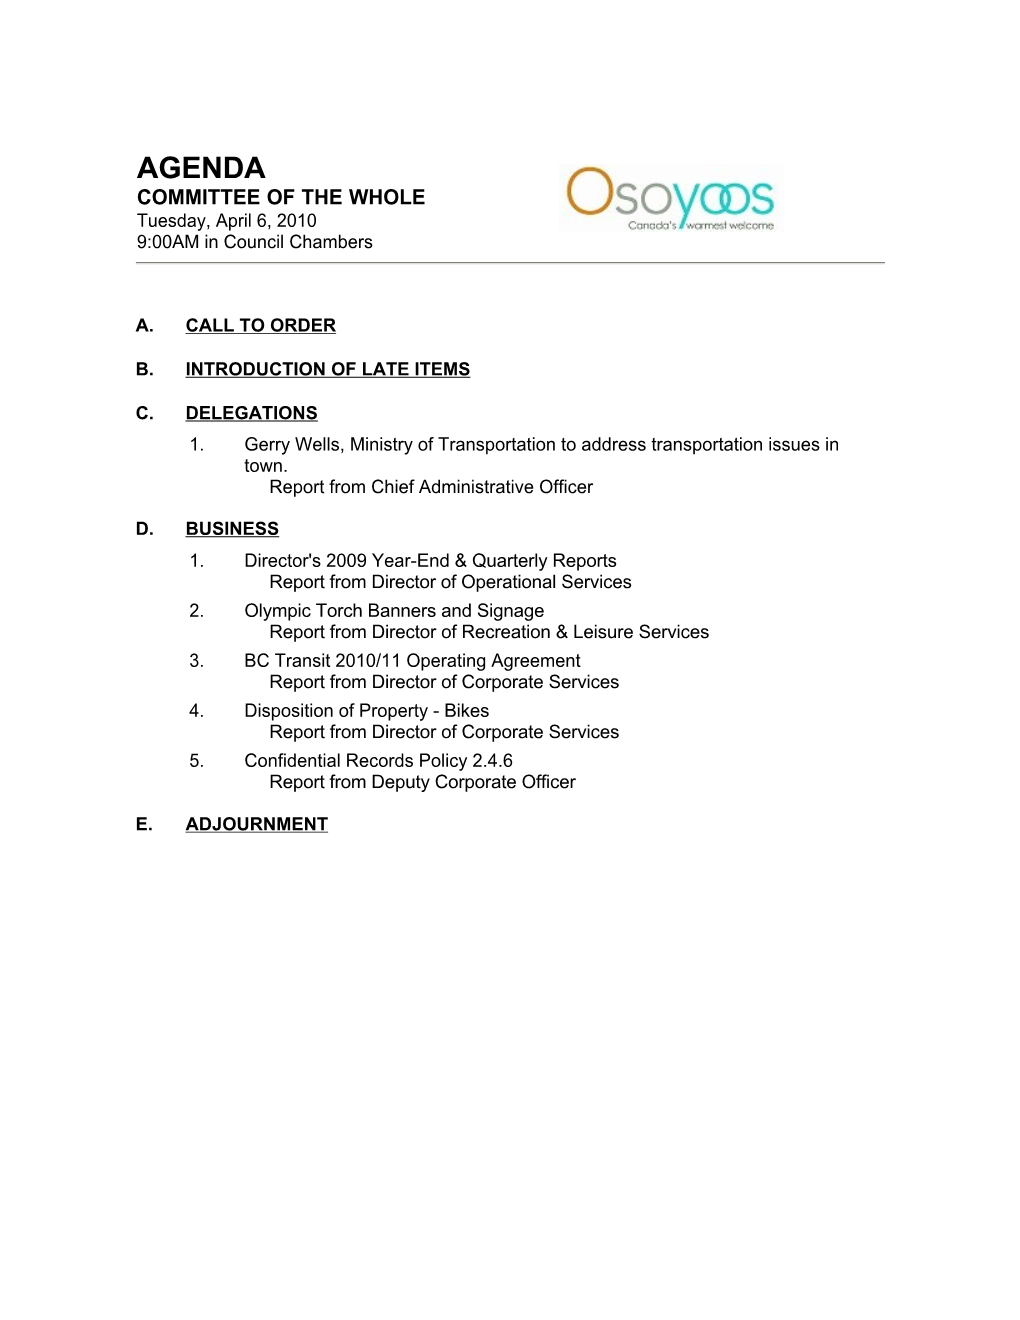 AGENDA COMMITTEE of the WHOLE Tuesday, April 6, 2010 9:00AM in Council Chambers